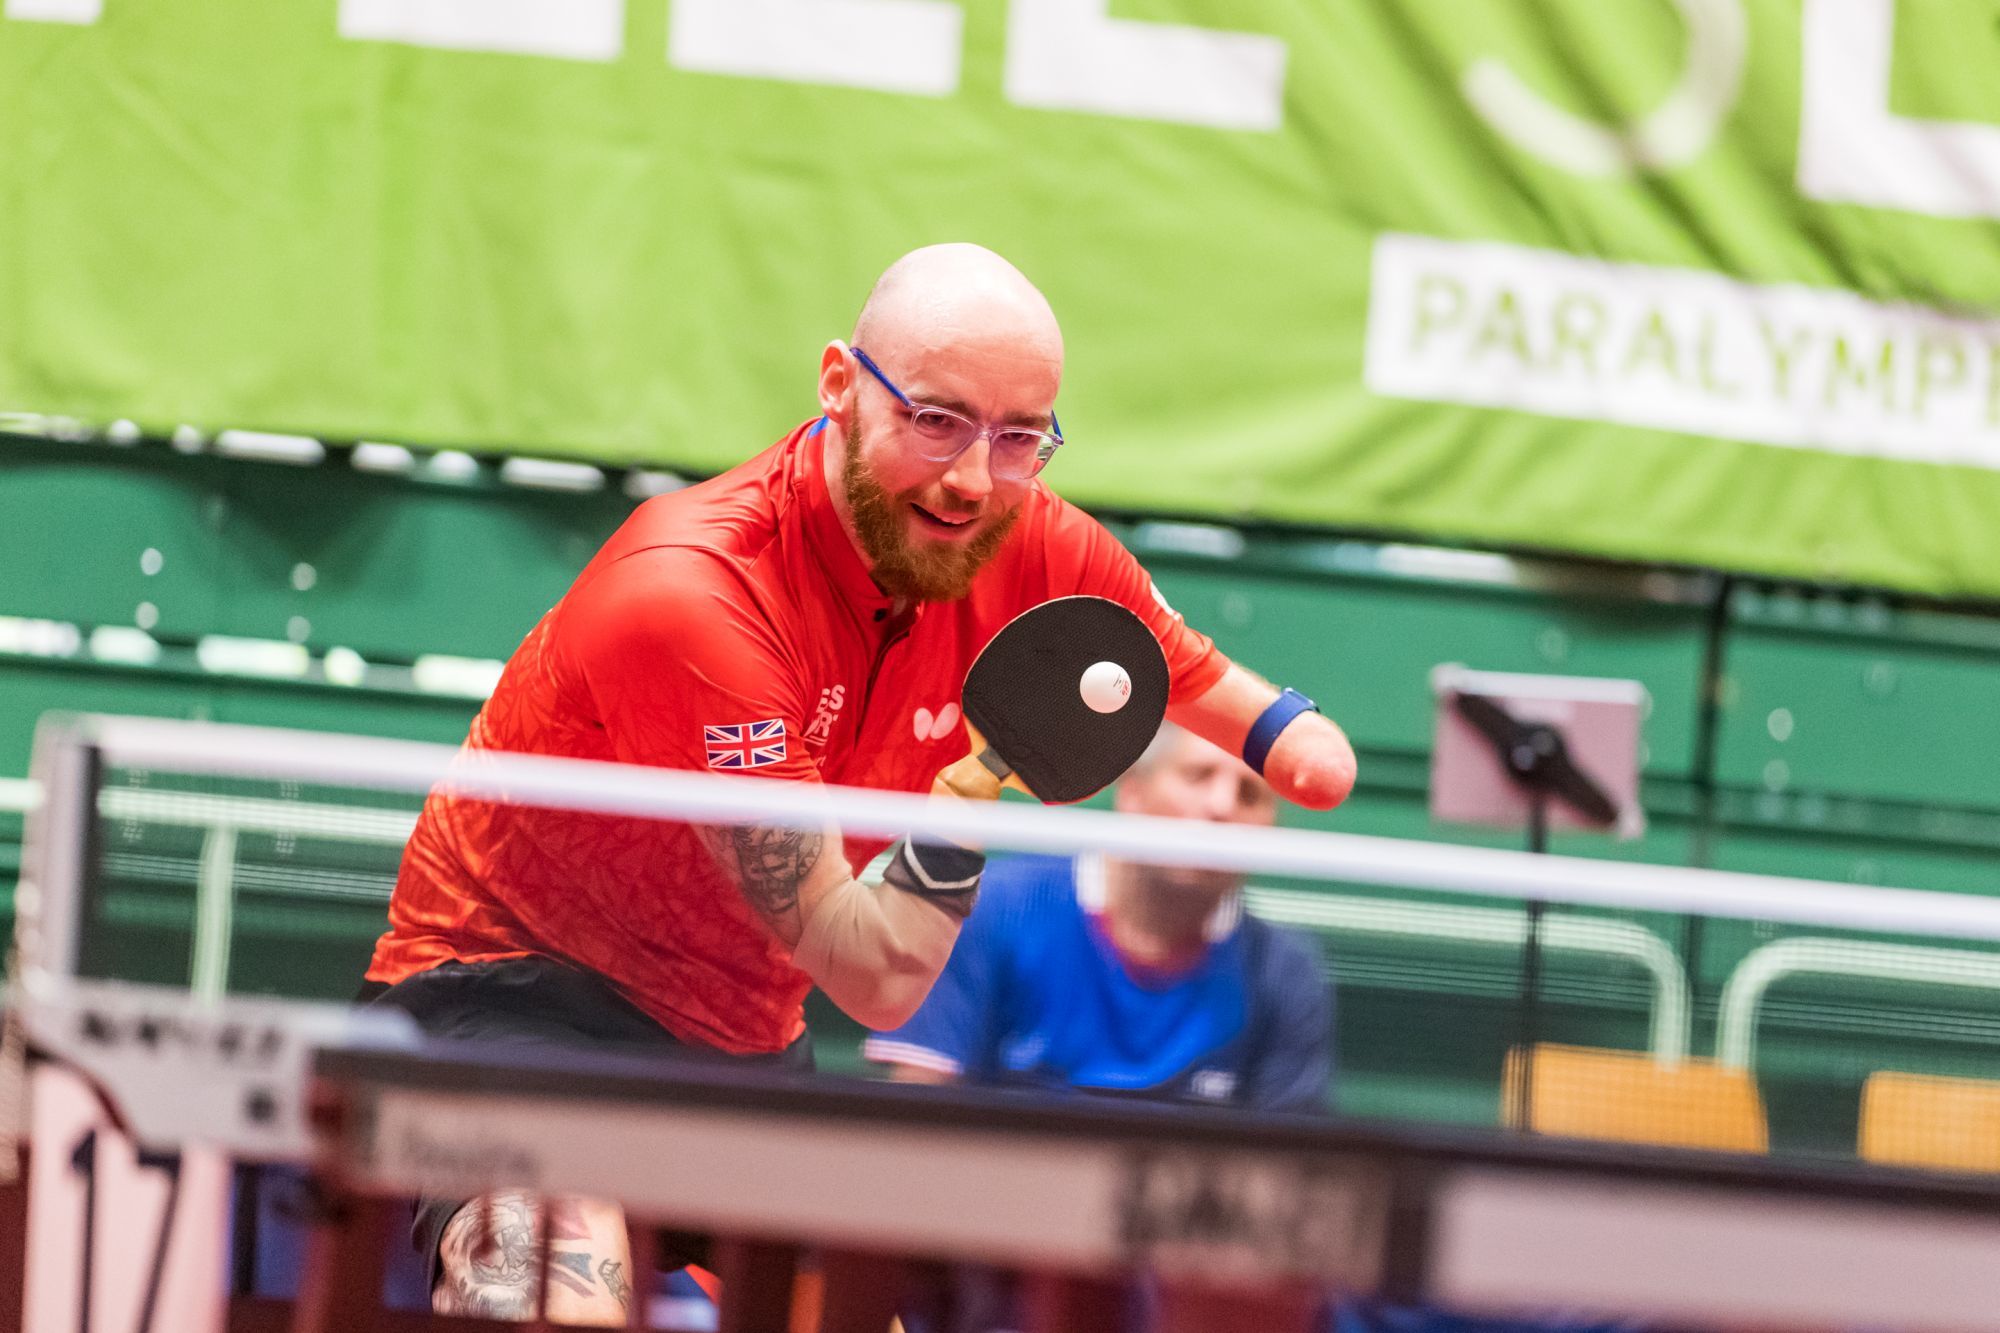 Table tennis star Martin Perry is aiming high. Image by Manca Meglic